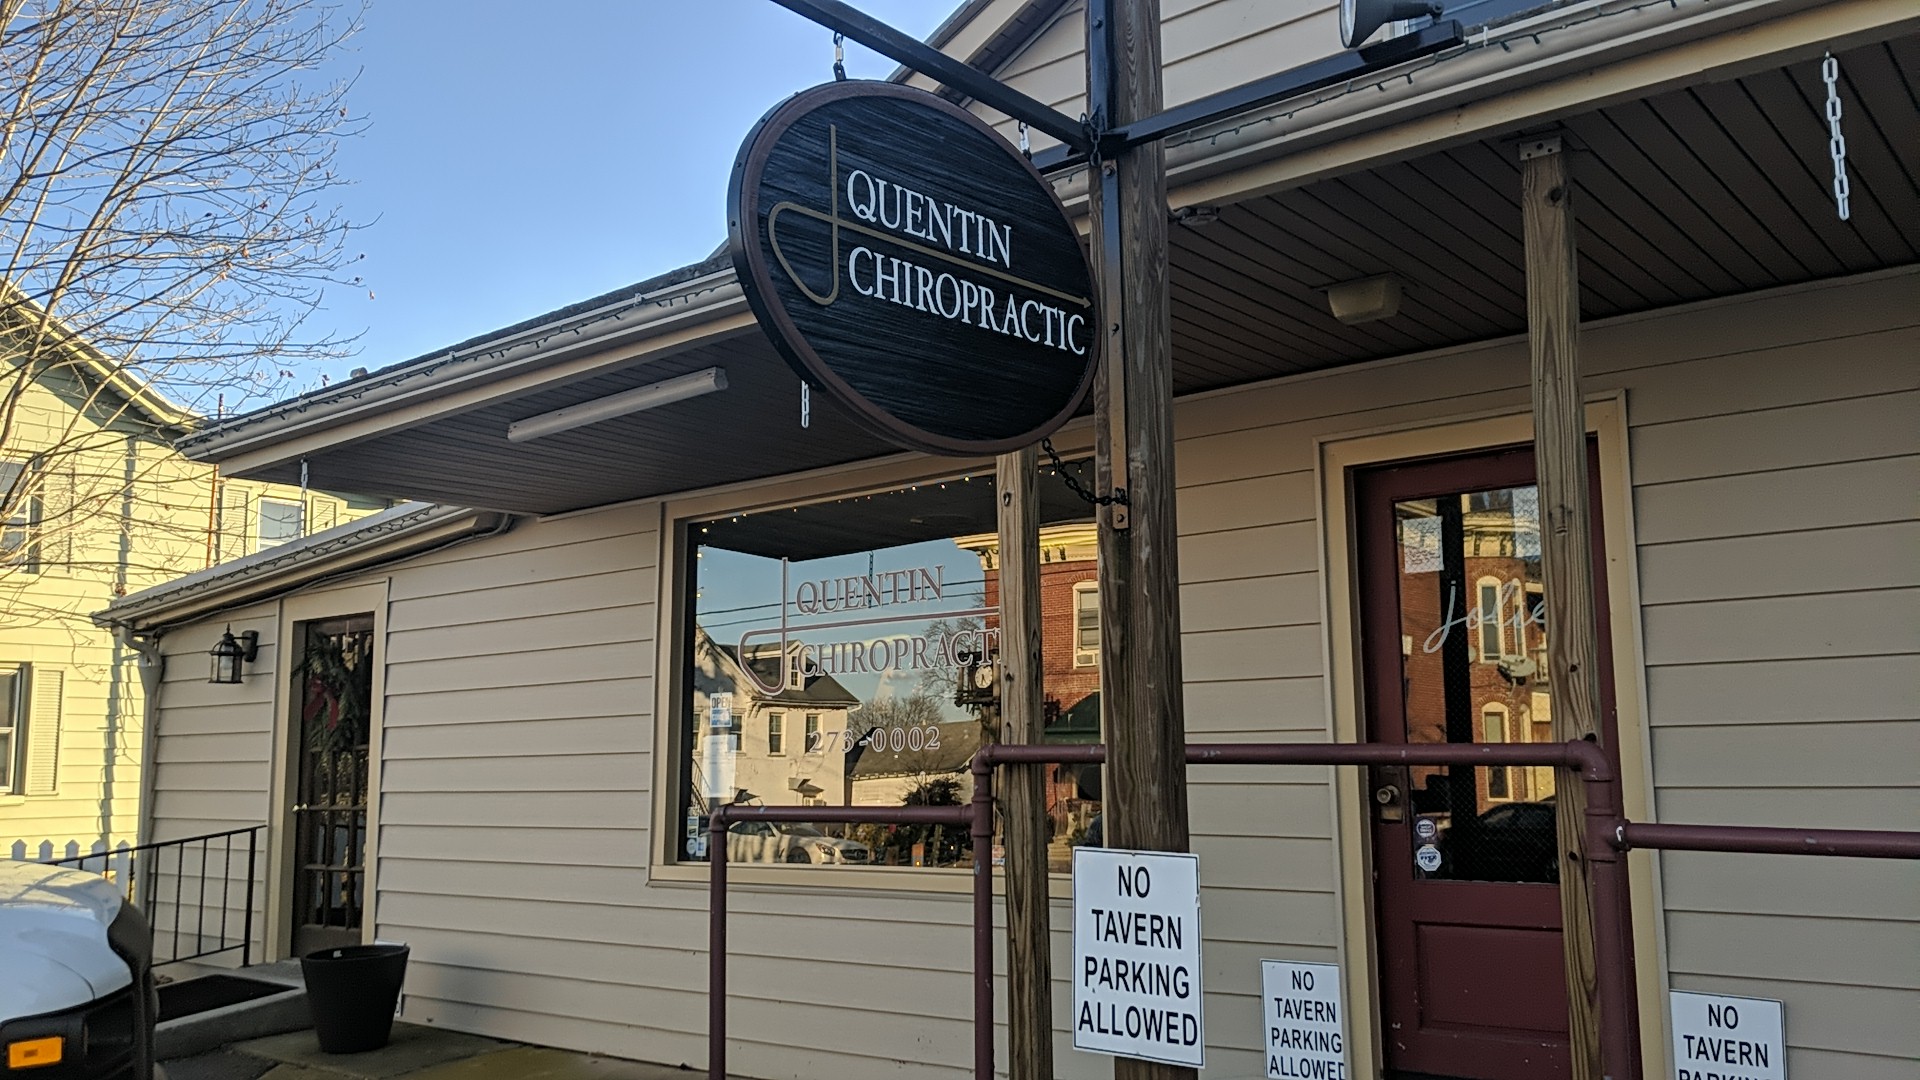 Quentin Chiropractic 80 W Main St, Quentin Pennsylvania 17083